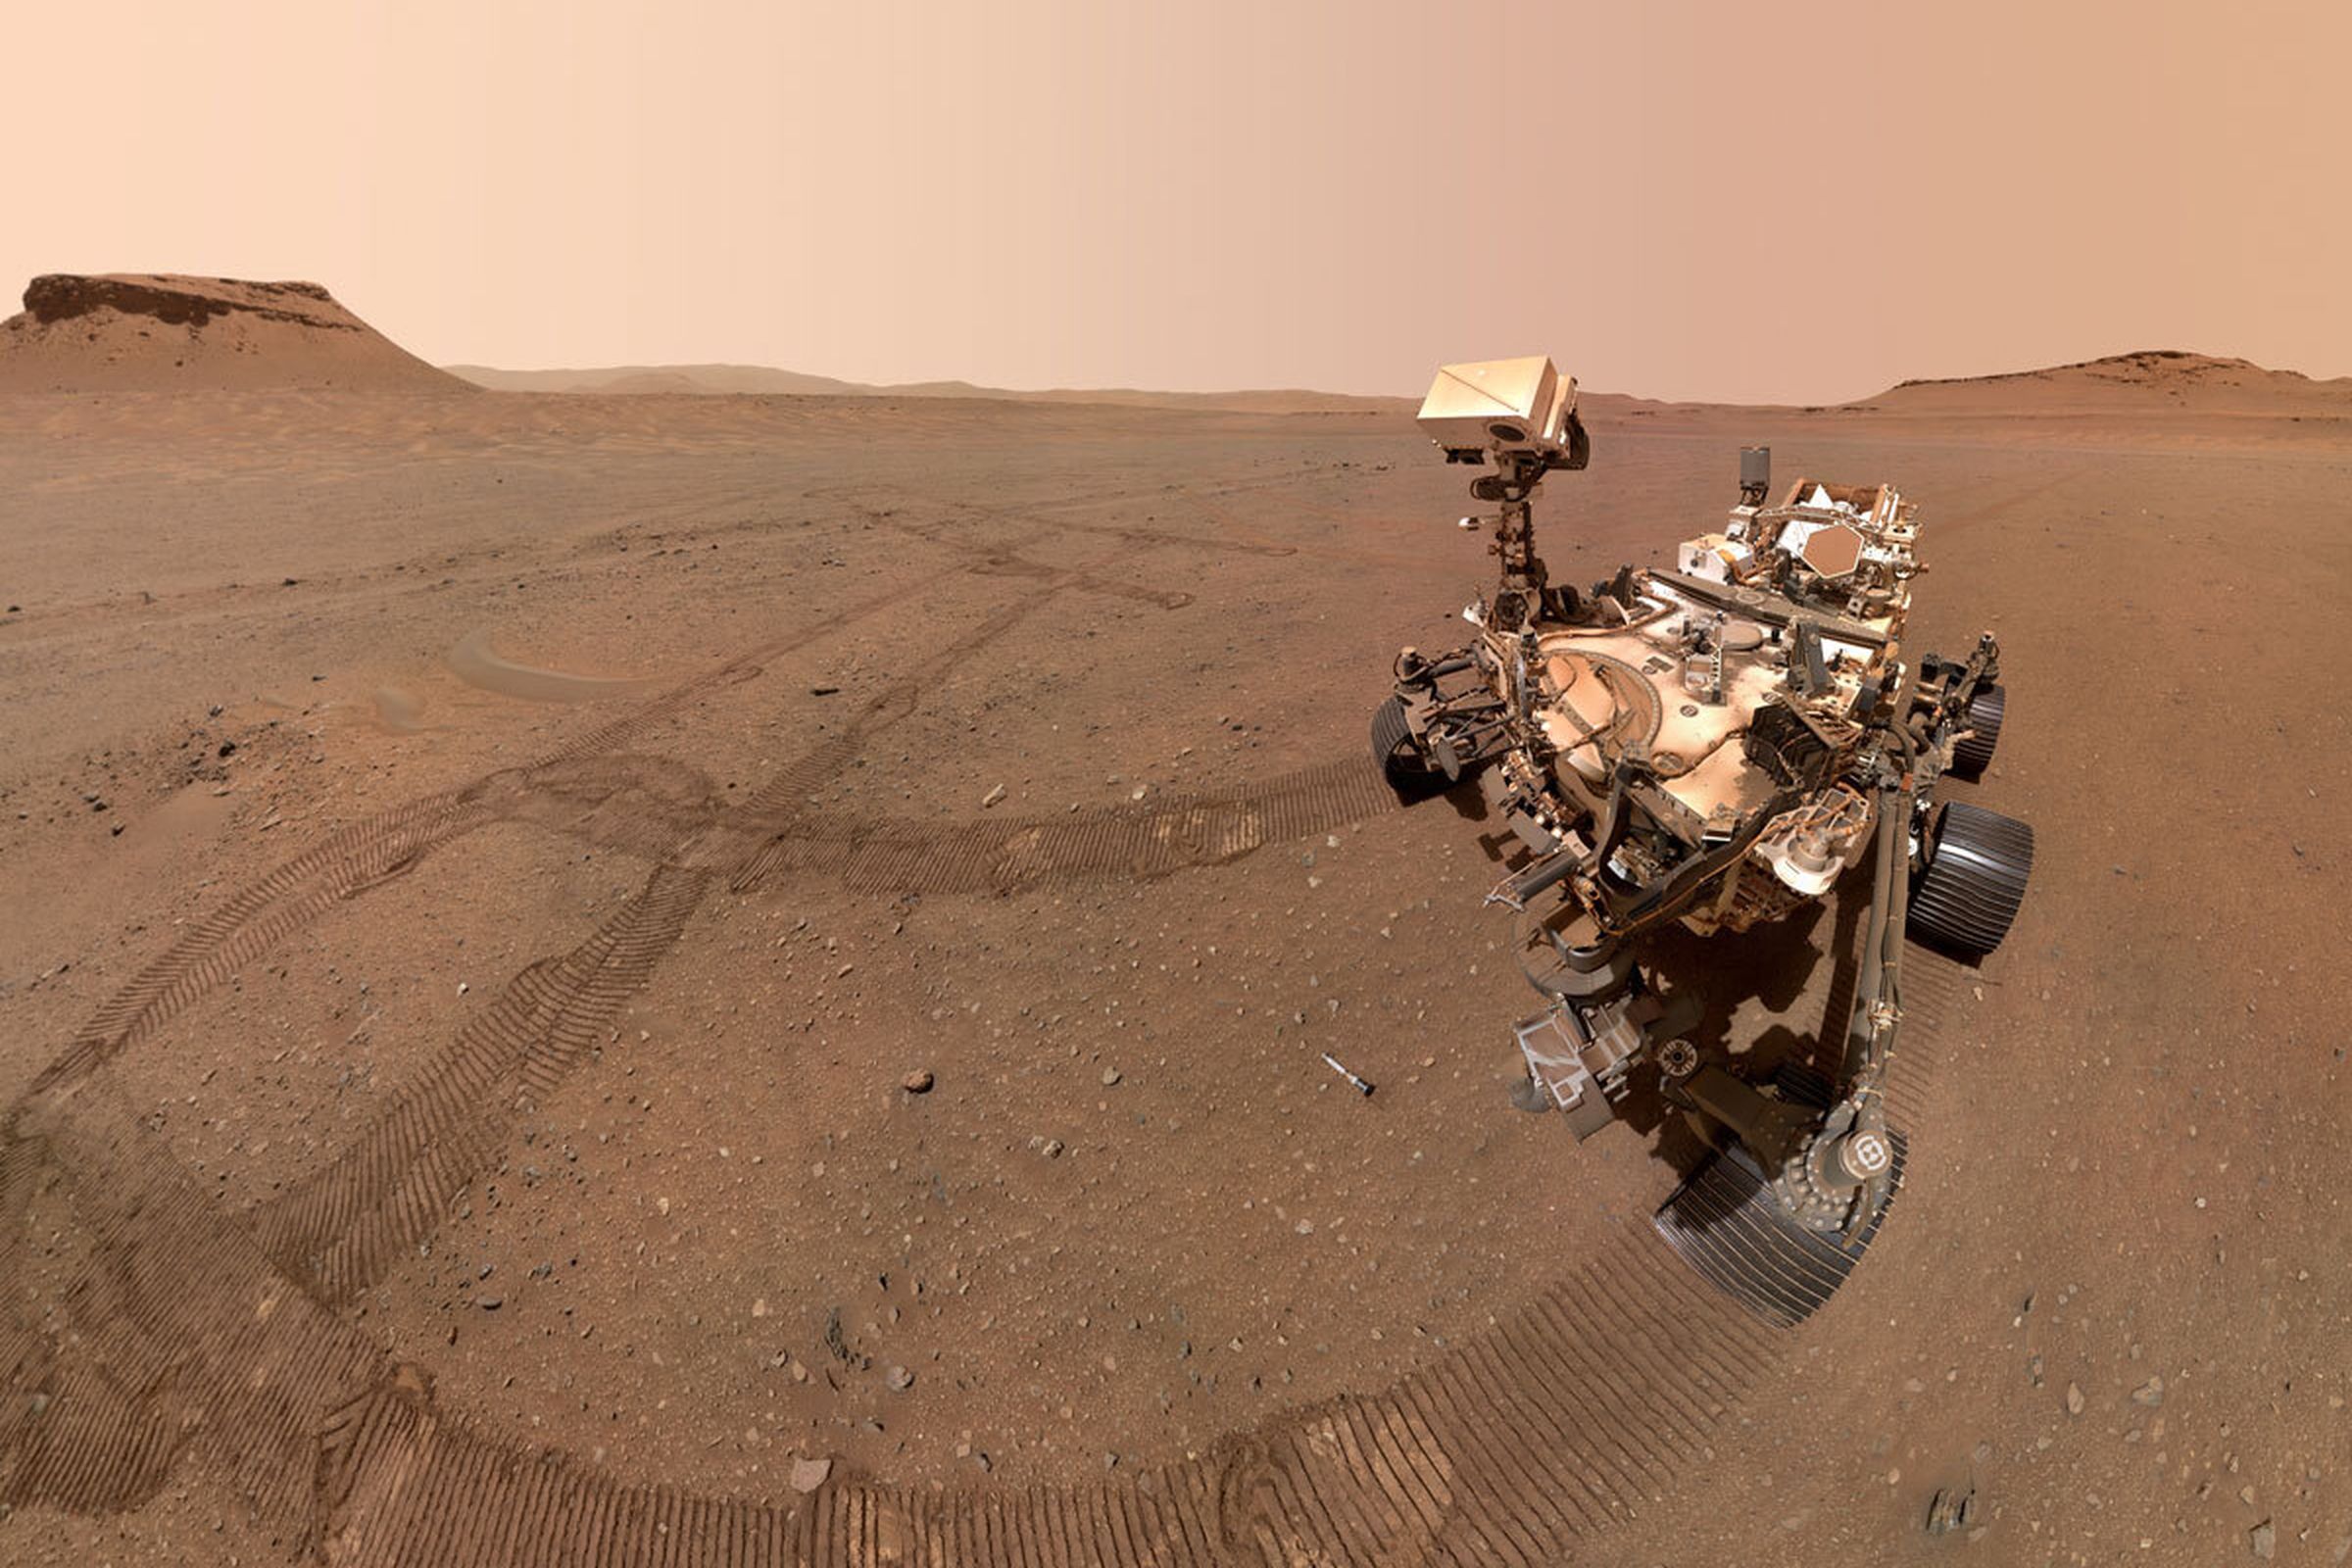 The NASA&nbsp;Perseverance rover taking a selfie beside a deposited sample tube.